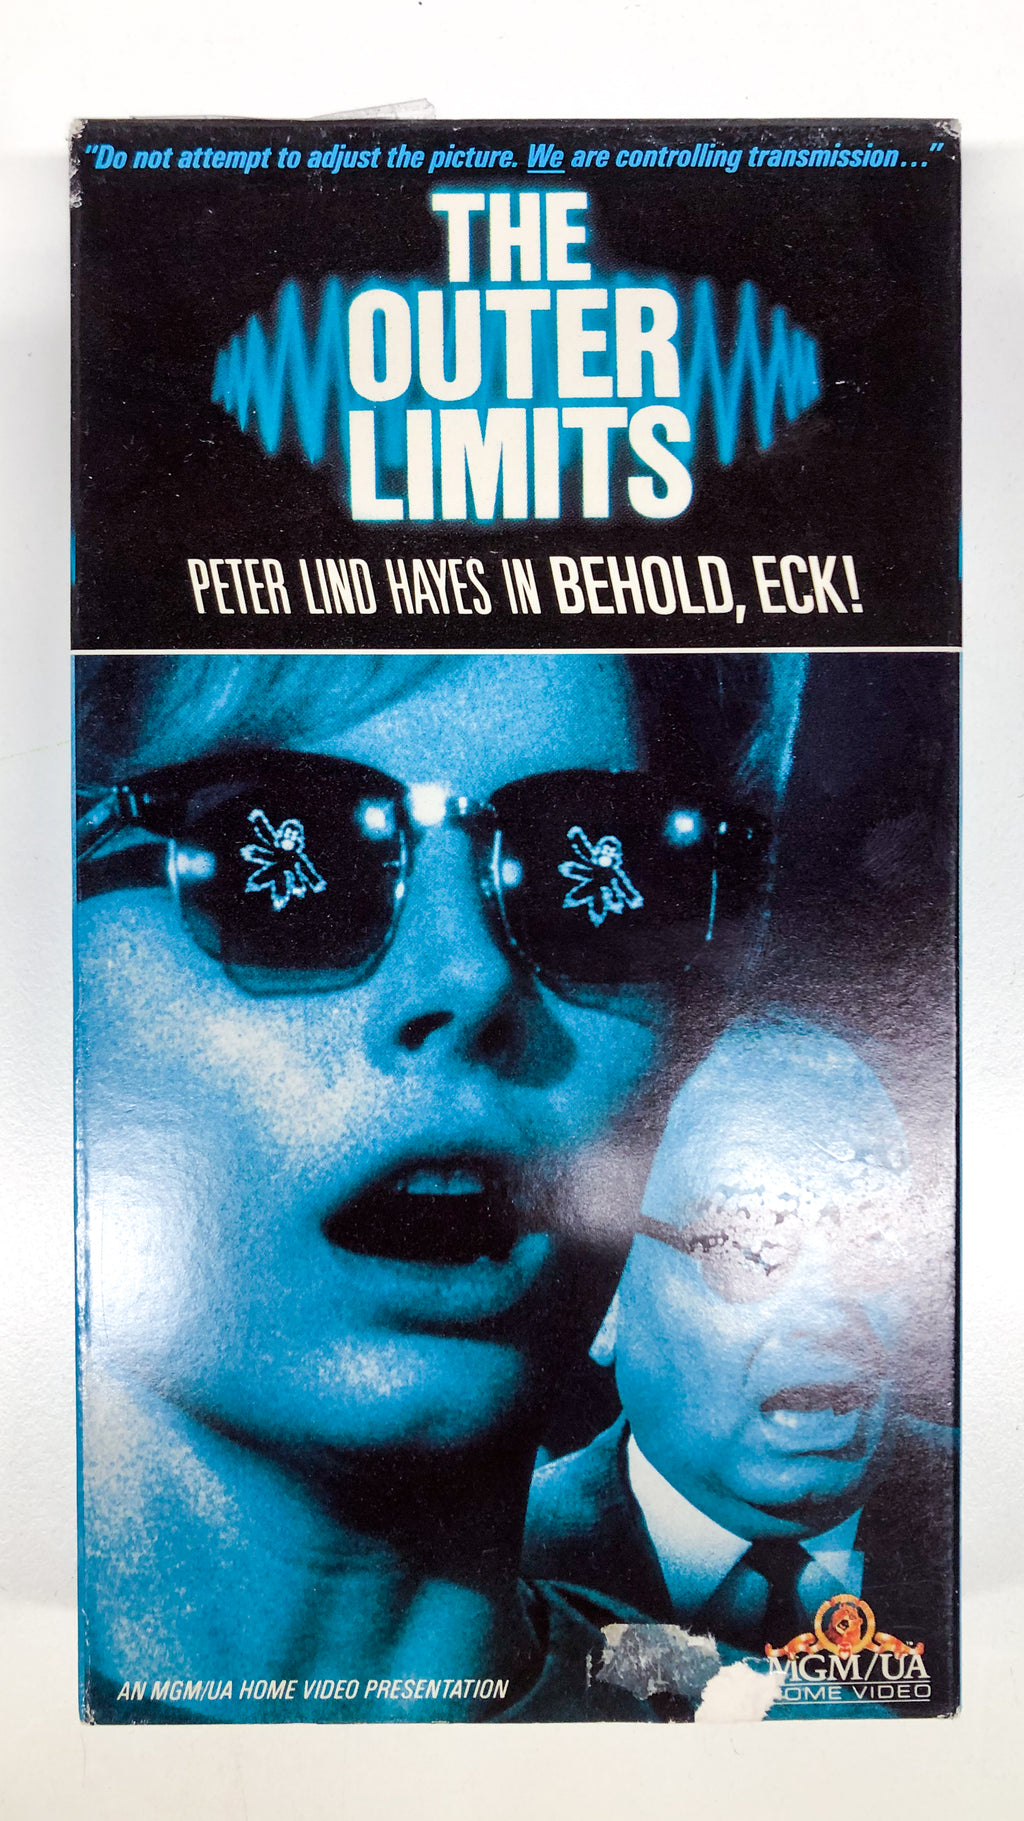 The Outer Limits: Behold, Eck!